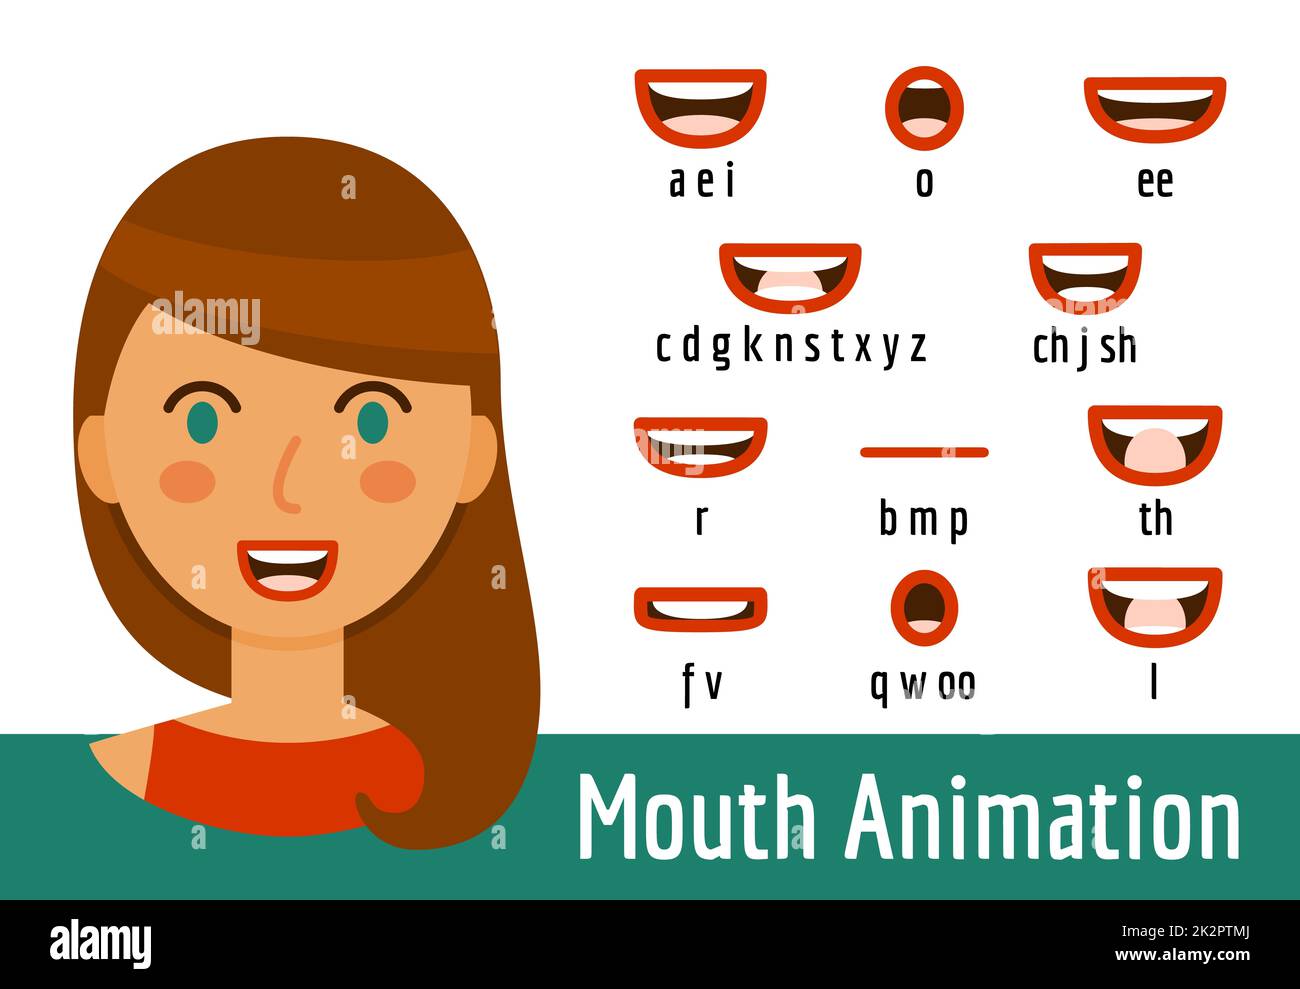 Mouth Lip Sync set for animation of sound pronunciation Stock Photo